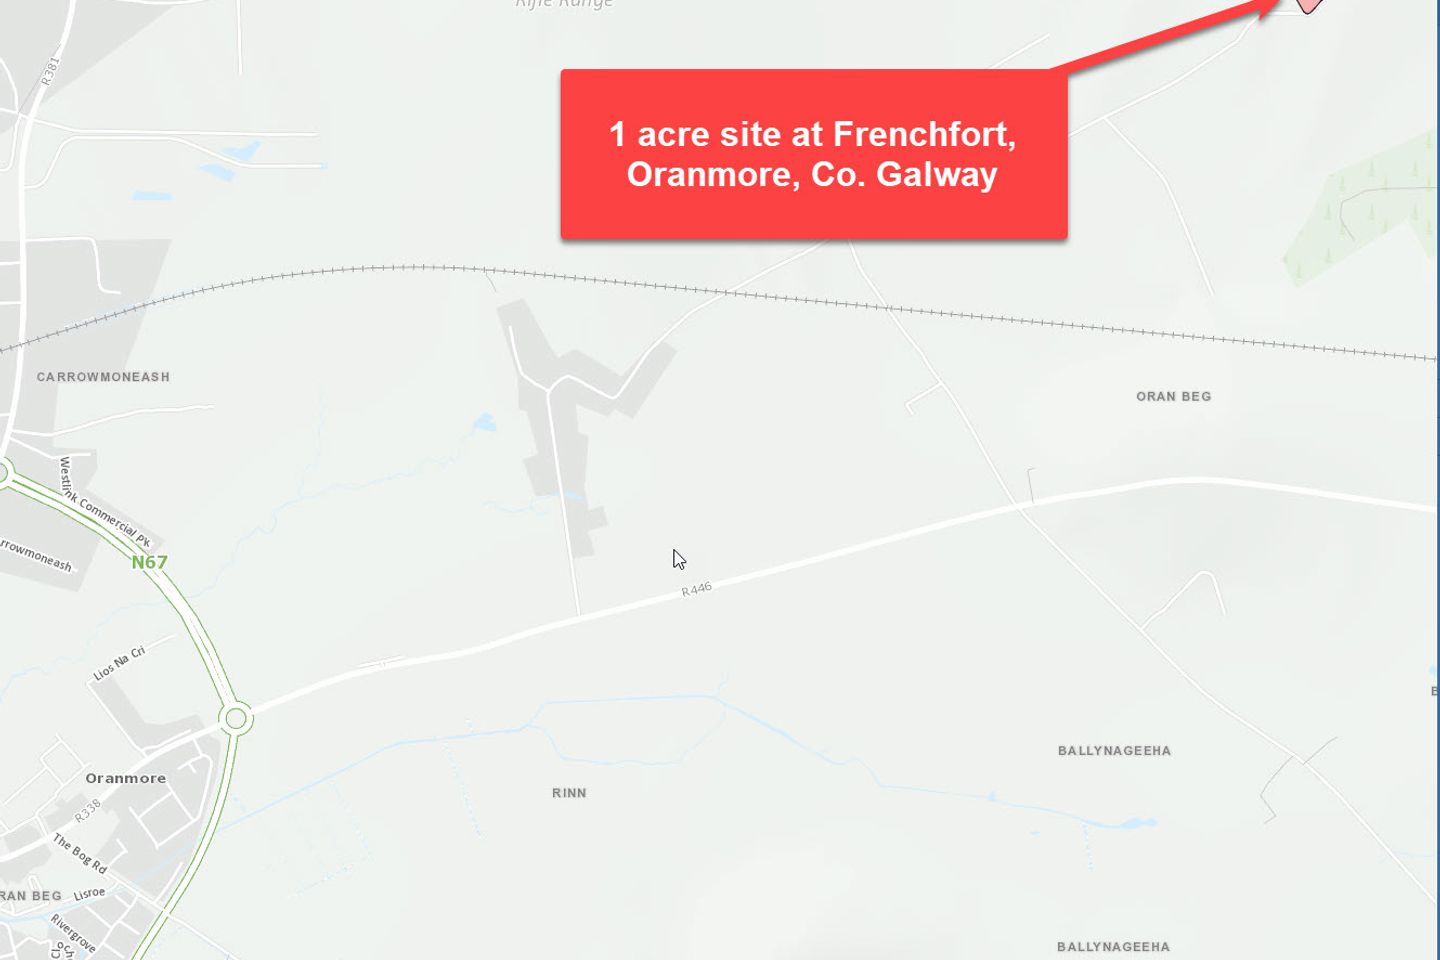 Frenchfort, Oranmore, Co. Galway